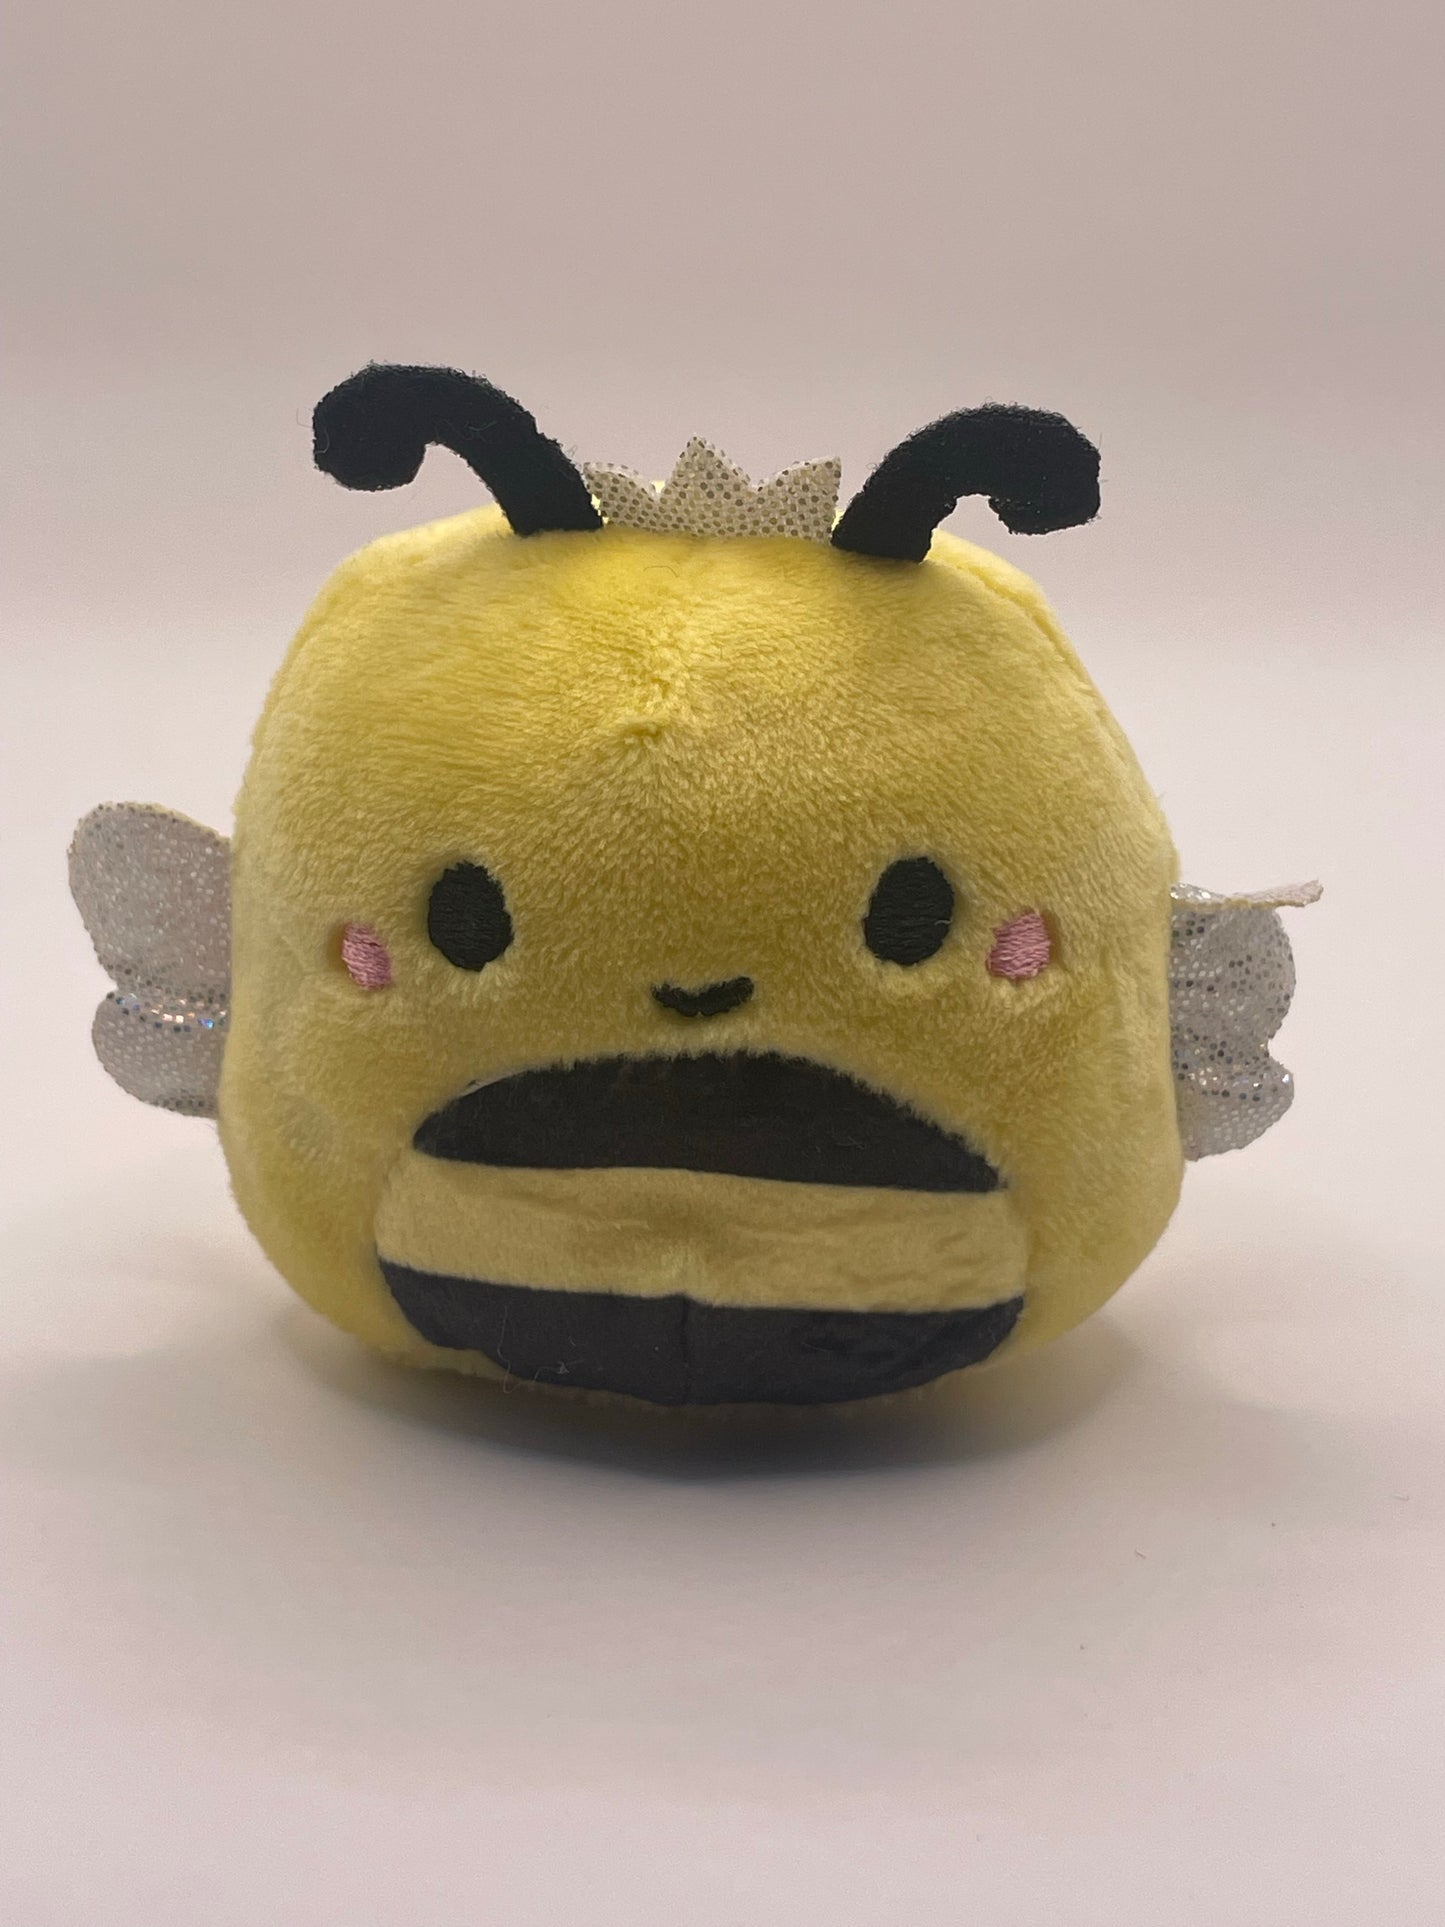 Sunny the Bee ~ SERIES 2: MICROMALLOWS 2.5” Squishmallow ~ Limit 4 Per Customer